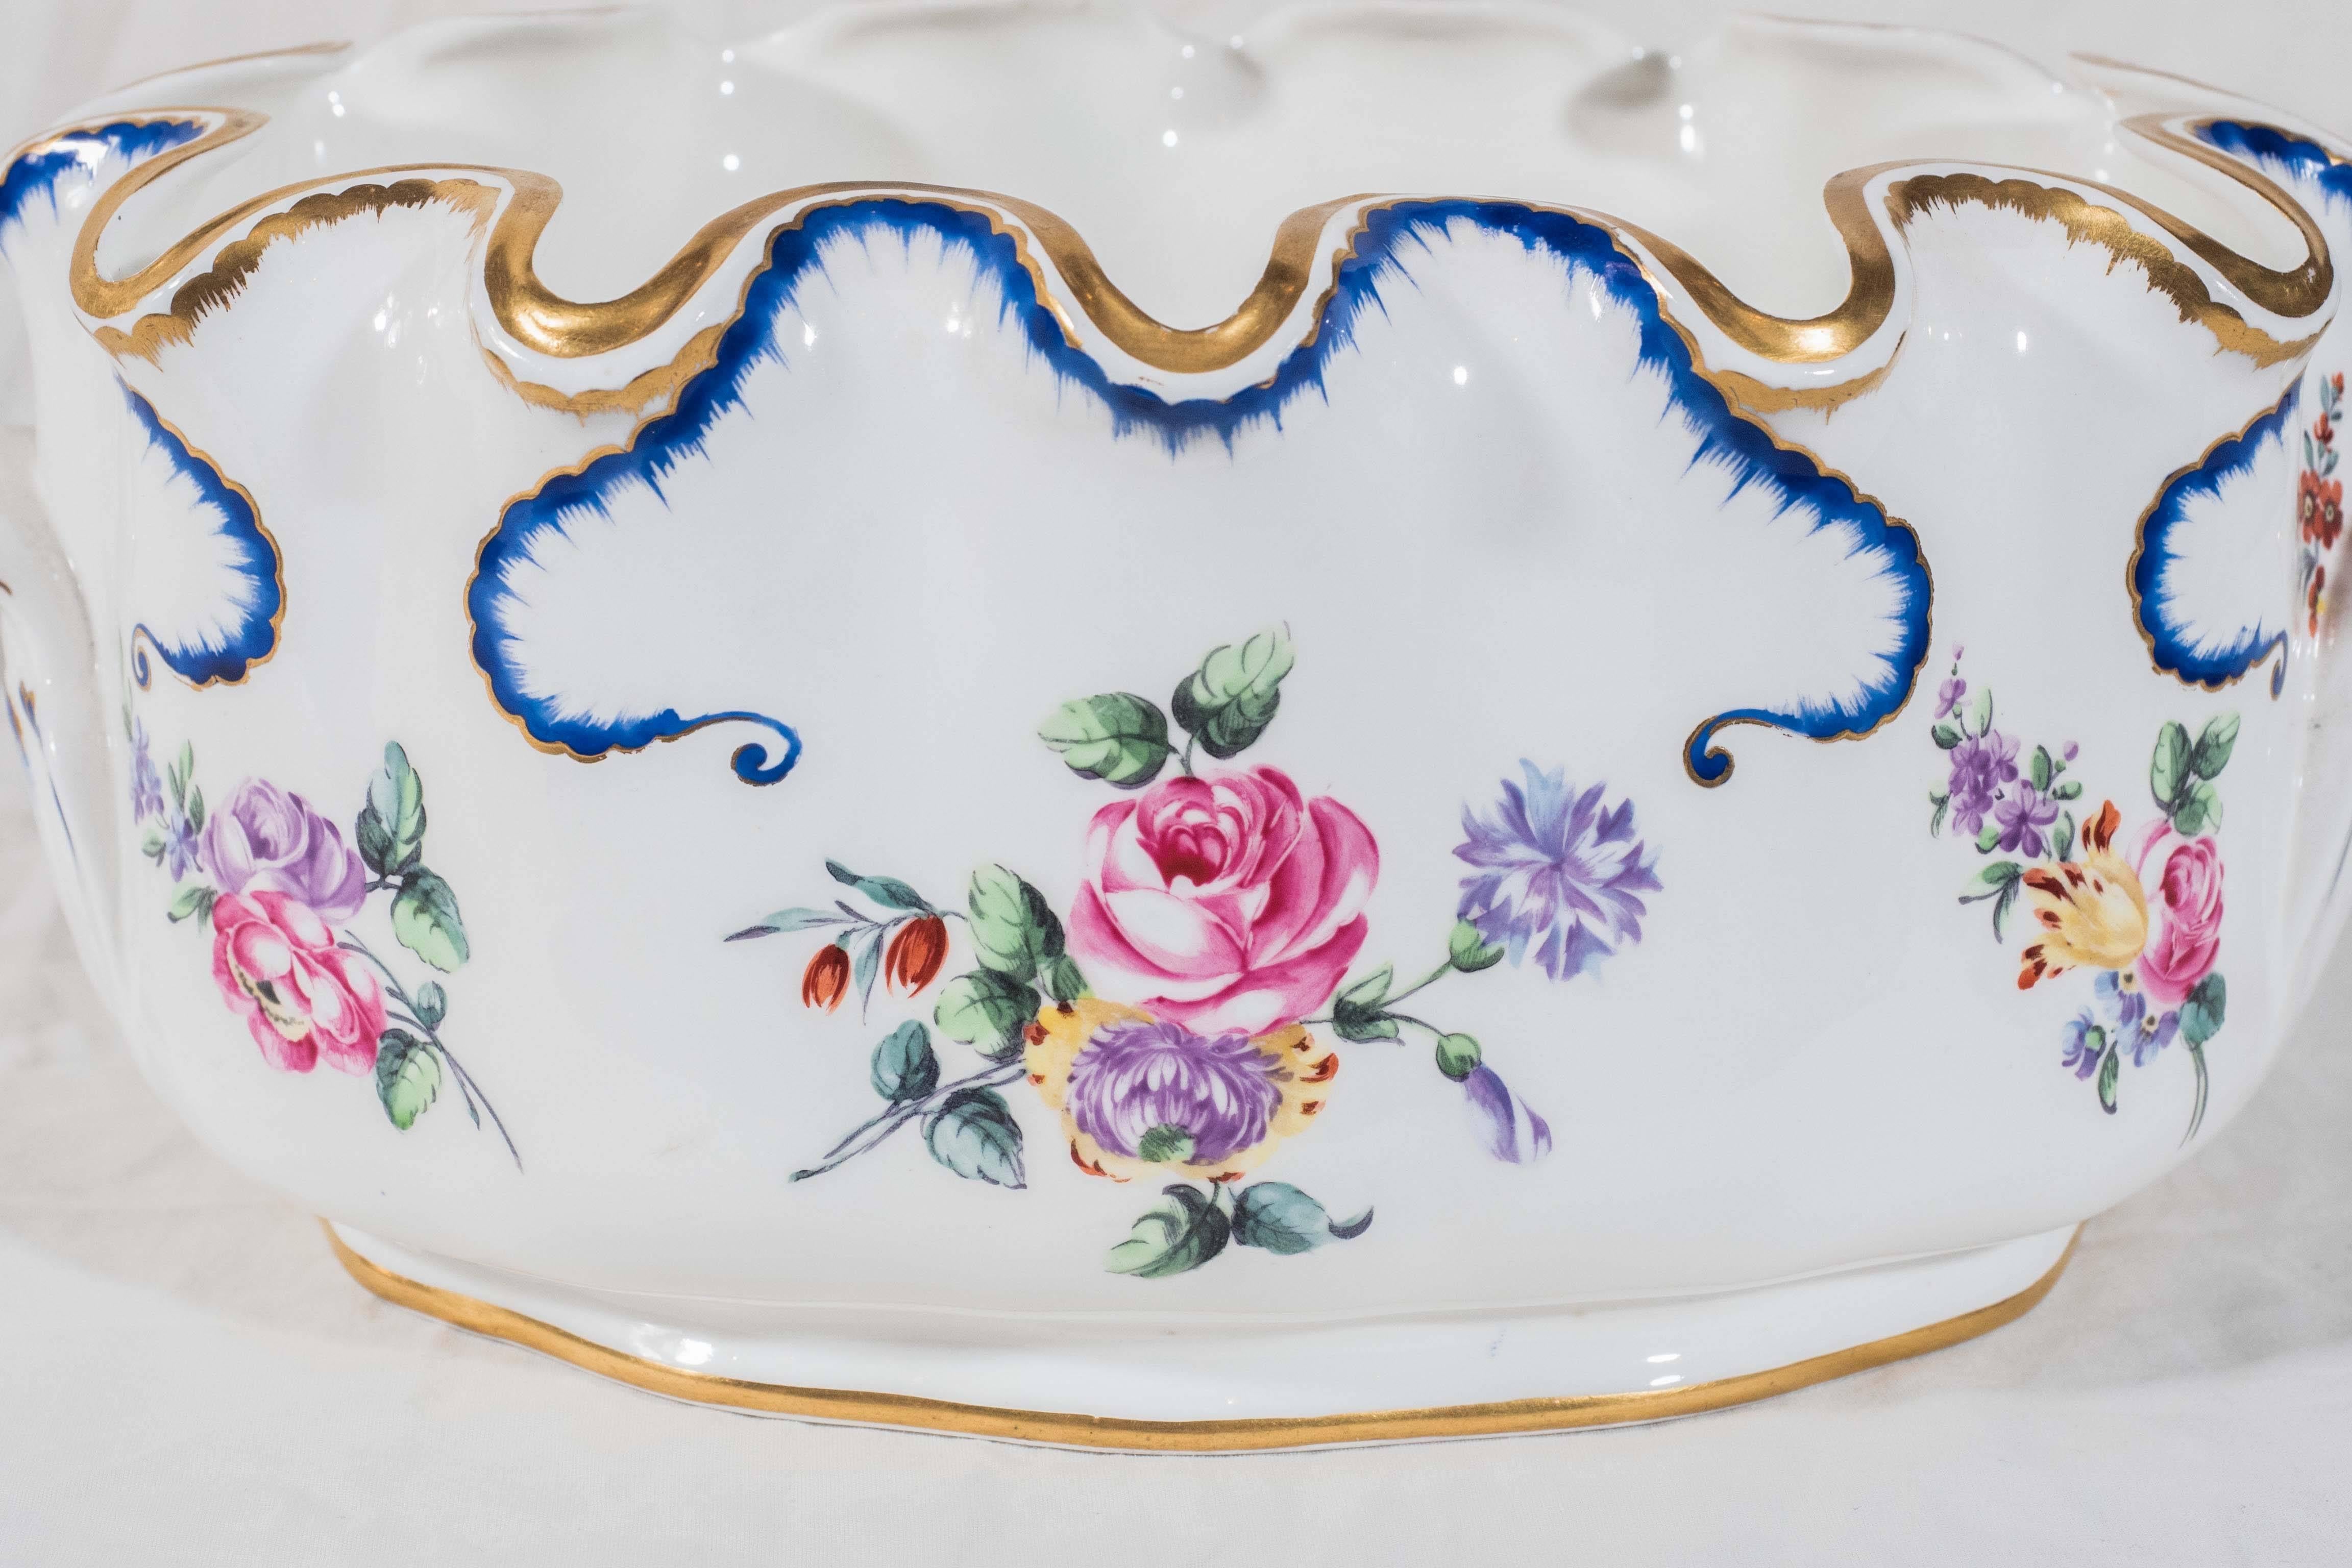 A continental monteith hand-painted with peonies and other flowers in the Feuille de Choux pattern. This form was used in the 18th and early 19th century as a wine glass rinser. Today this piece would be a lovely addition on any table planted with